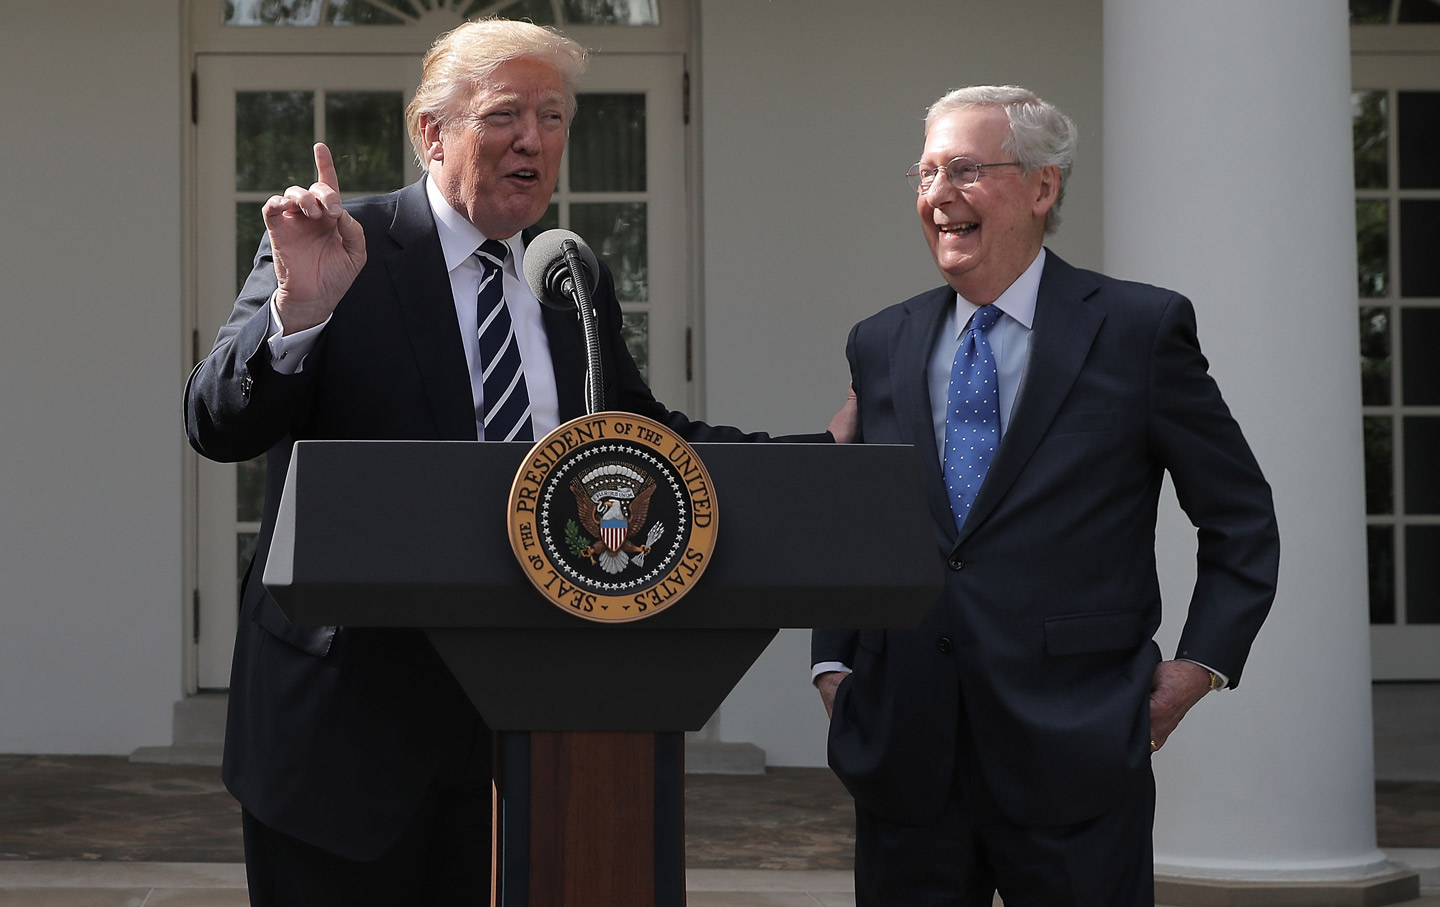 Trump and McConnell Are Undoing the Supreme Court’s Constitutional Legitimacy